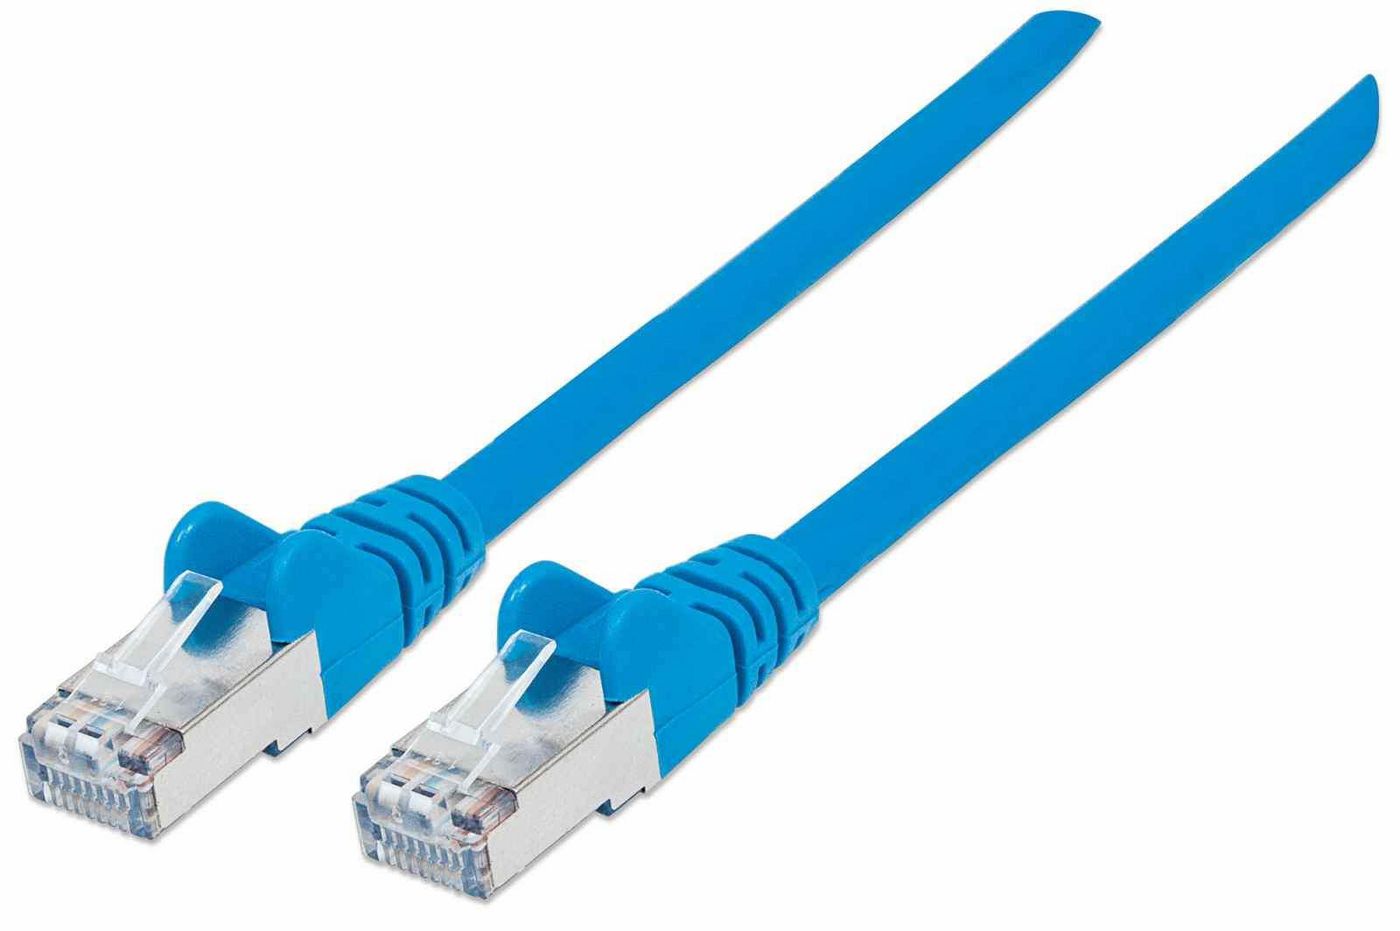 Intellinet 740722 High Performance Network Cable 